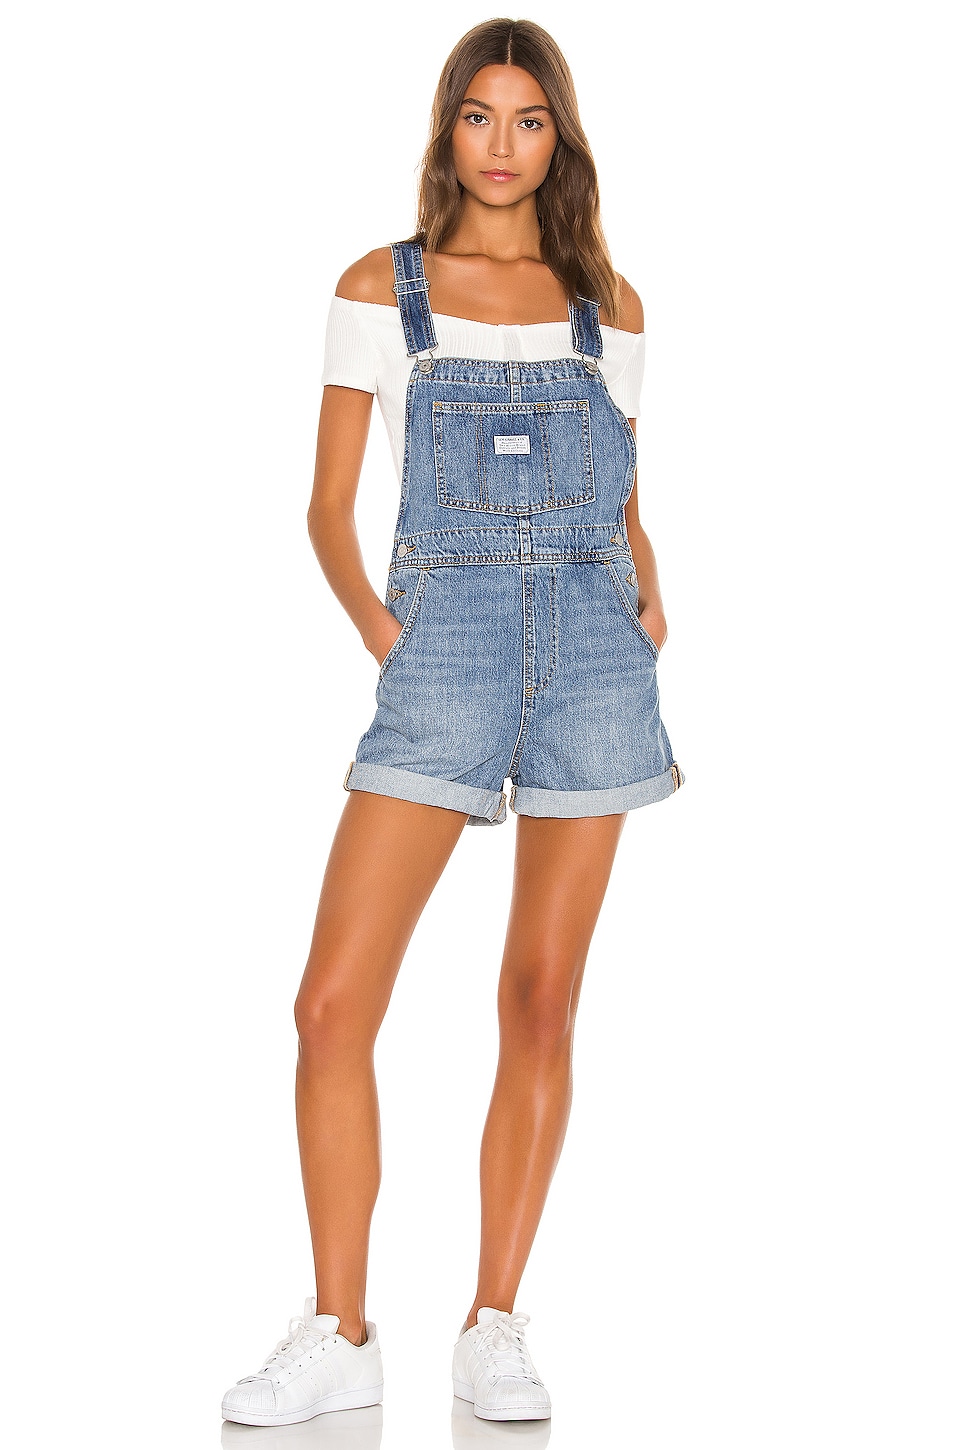 LEVI'S Vintage Shortall in Free Ride 